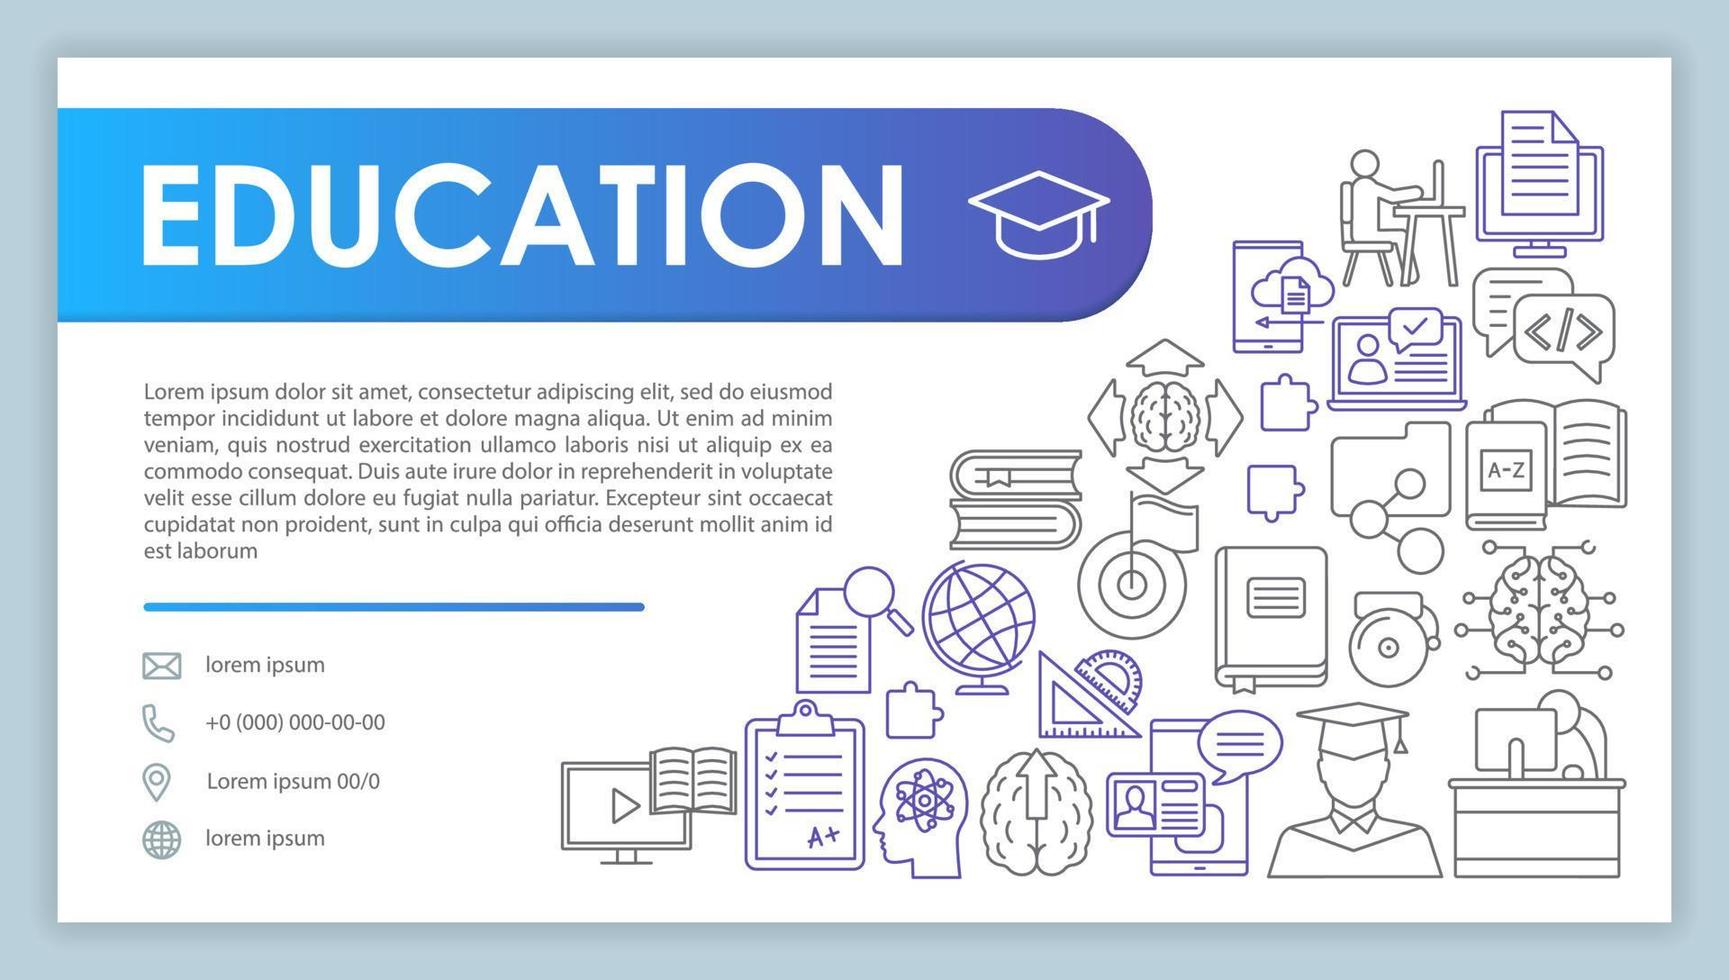 Education banner, business card template. Studying, learning. Company contact with phone, email linear icons. College, university graduation. Presentation, web page idea. Corporate print layout vector